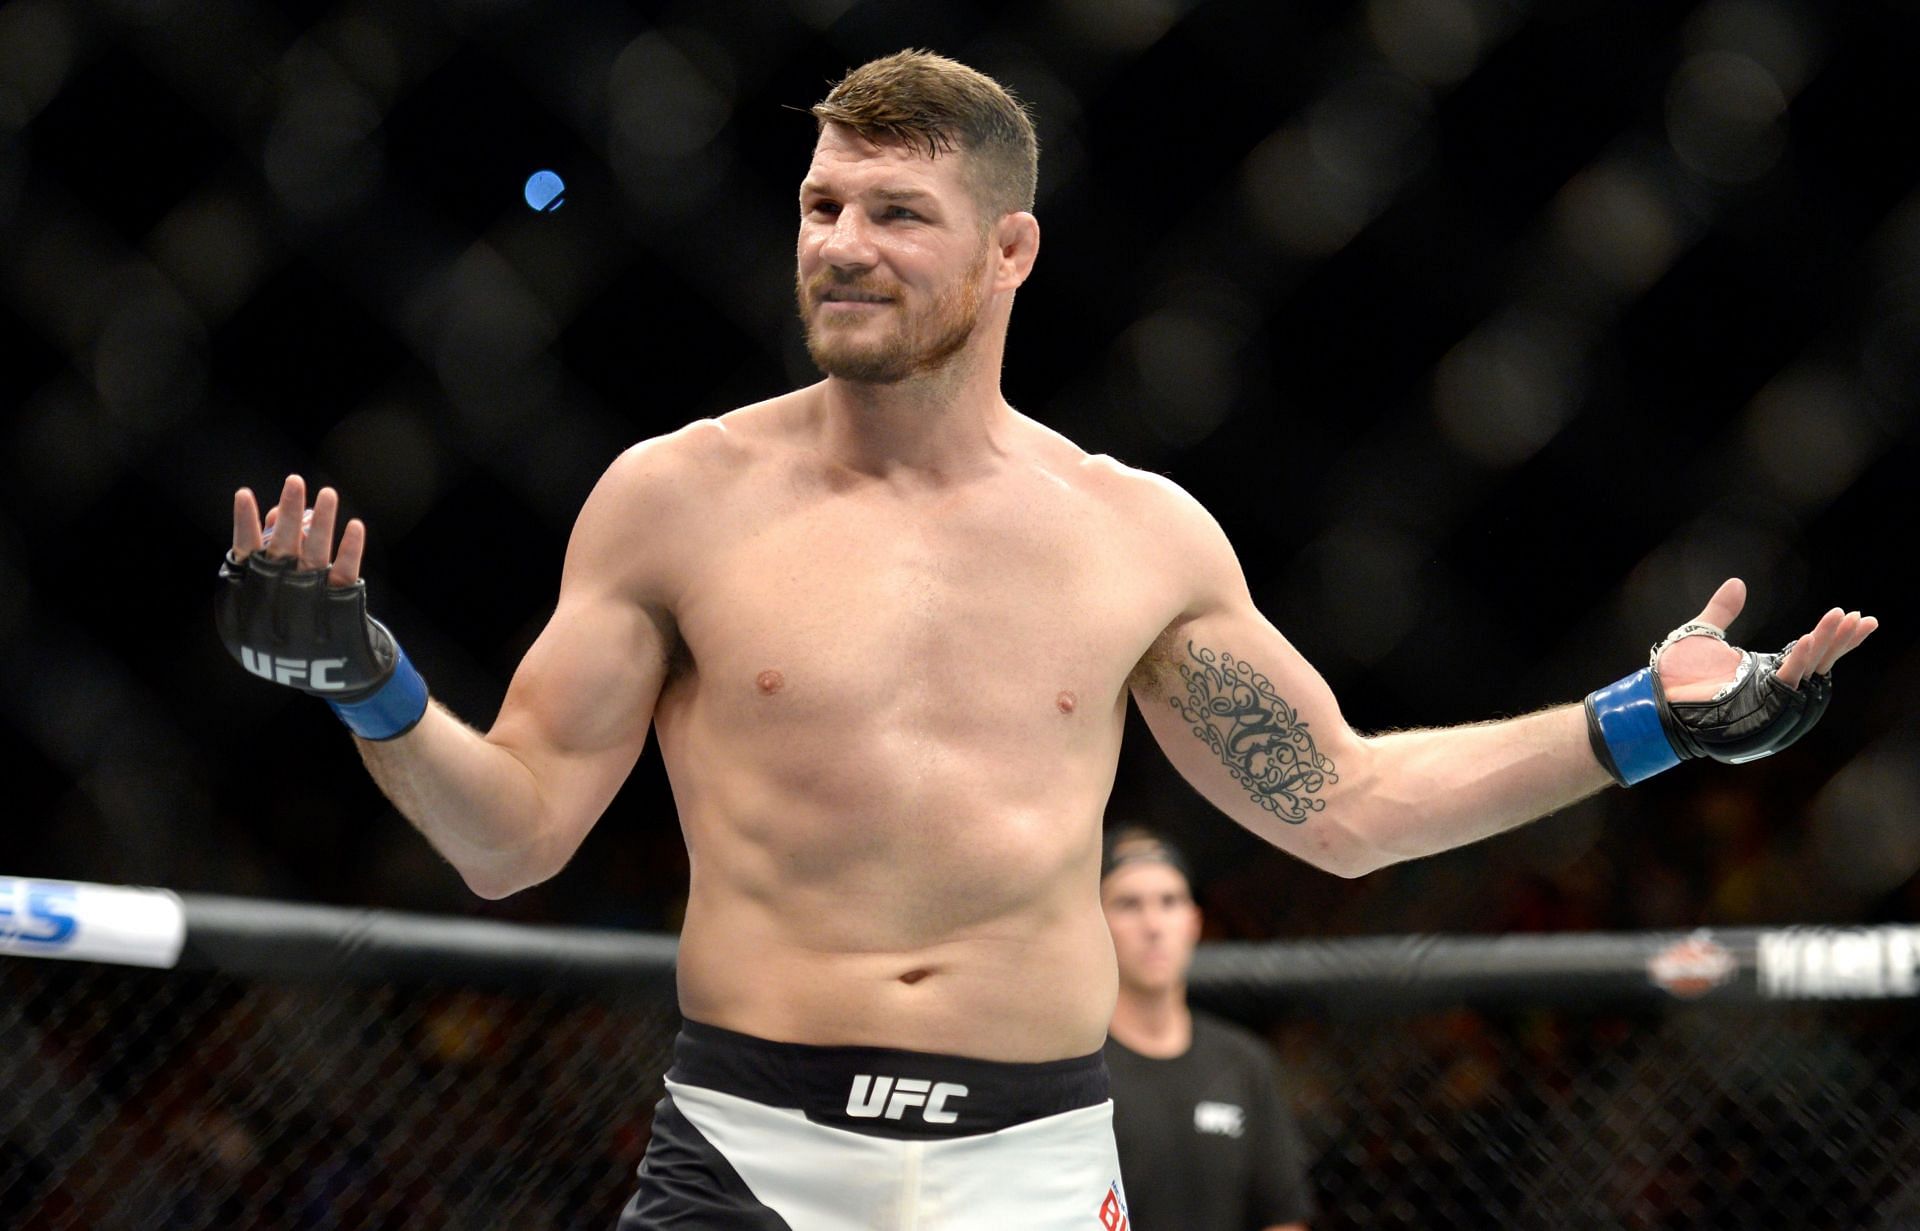 Michael Bisping became the first UFC champion to hail from the UK